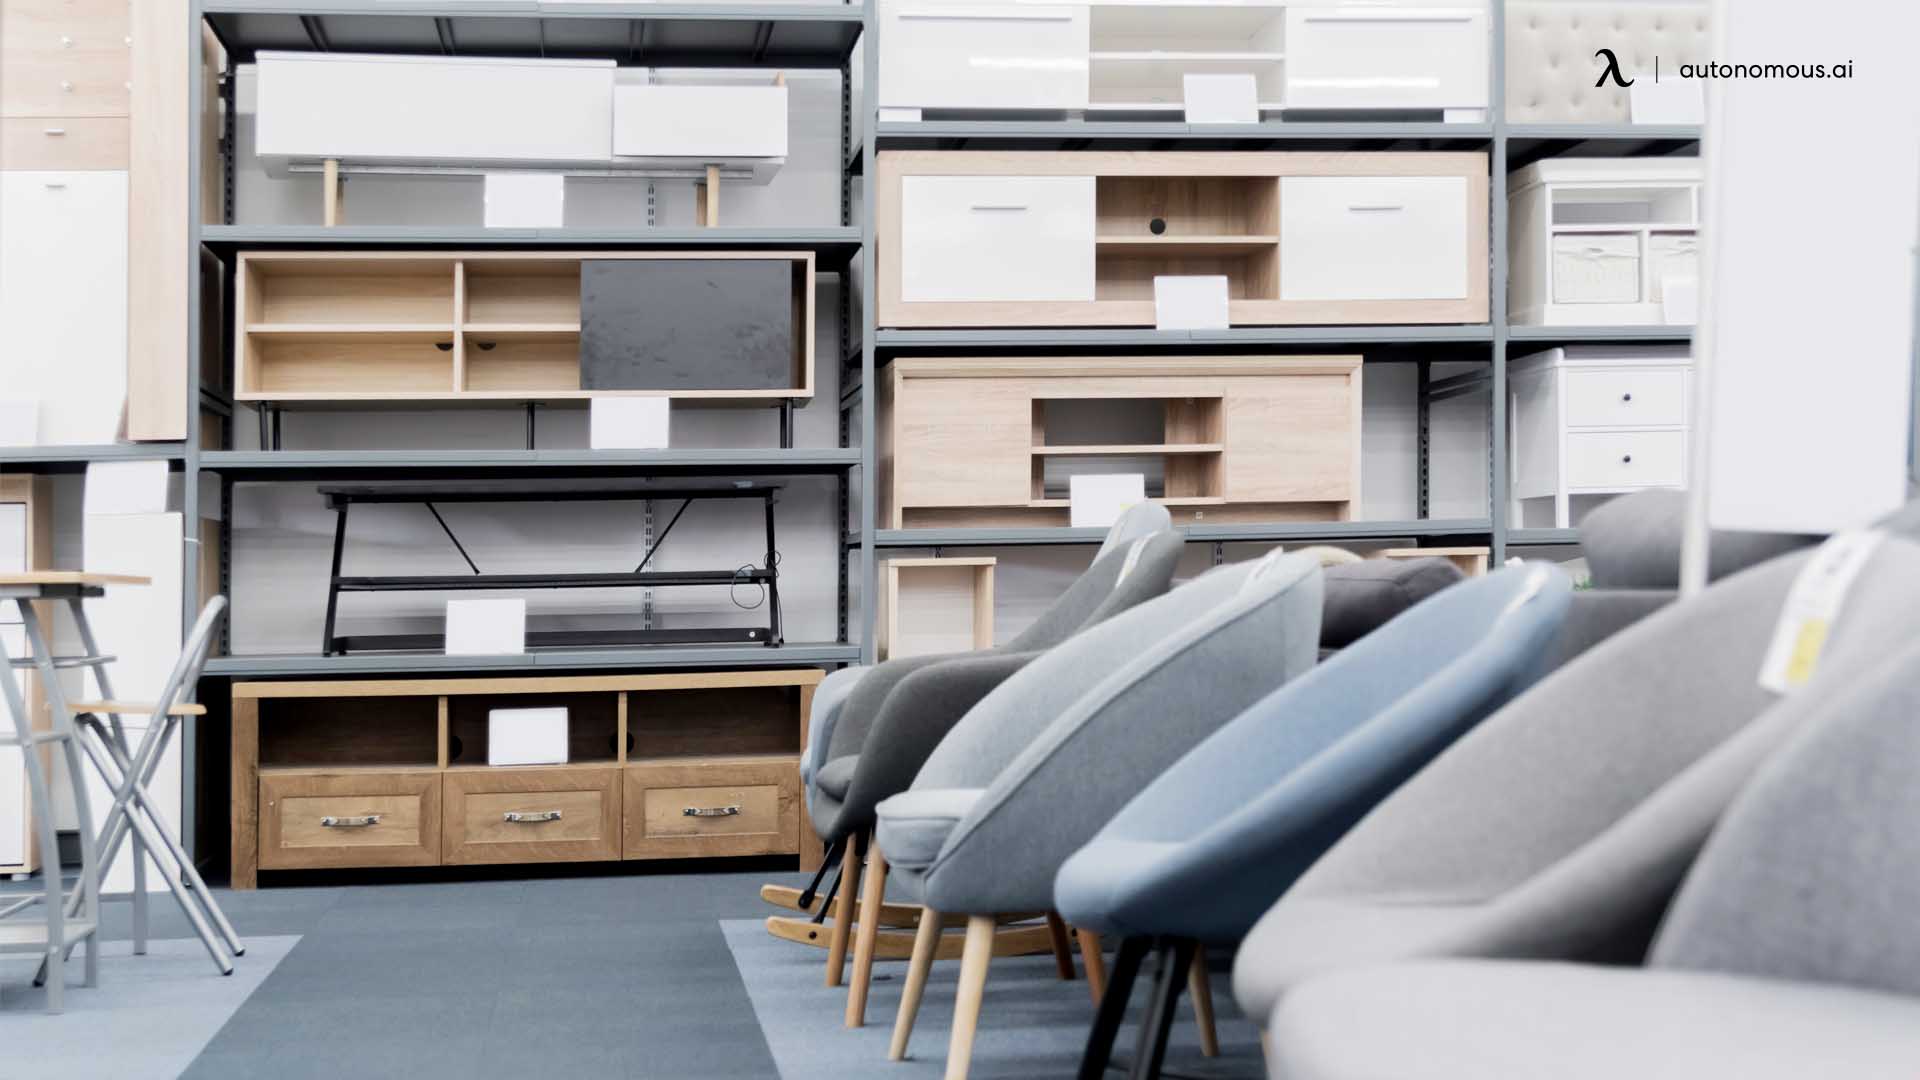 Where to Buy Office Furniture in Bulk with The Best Price?